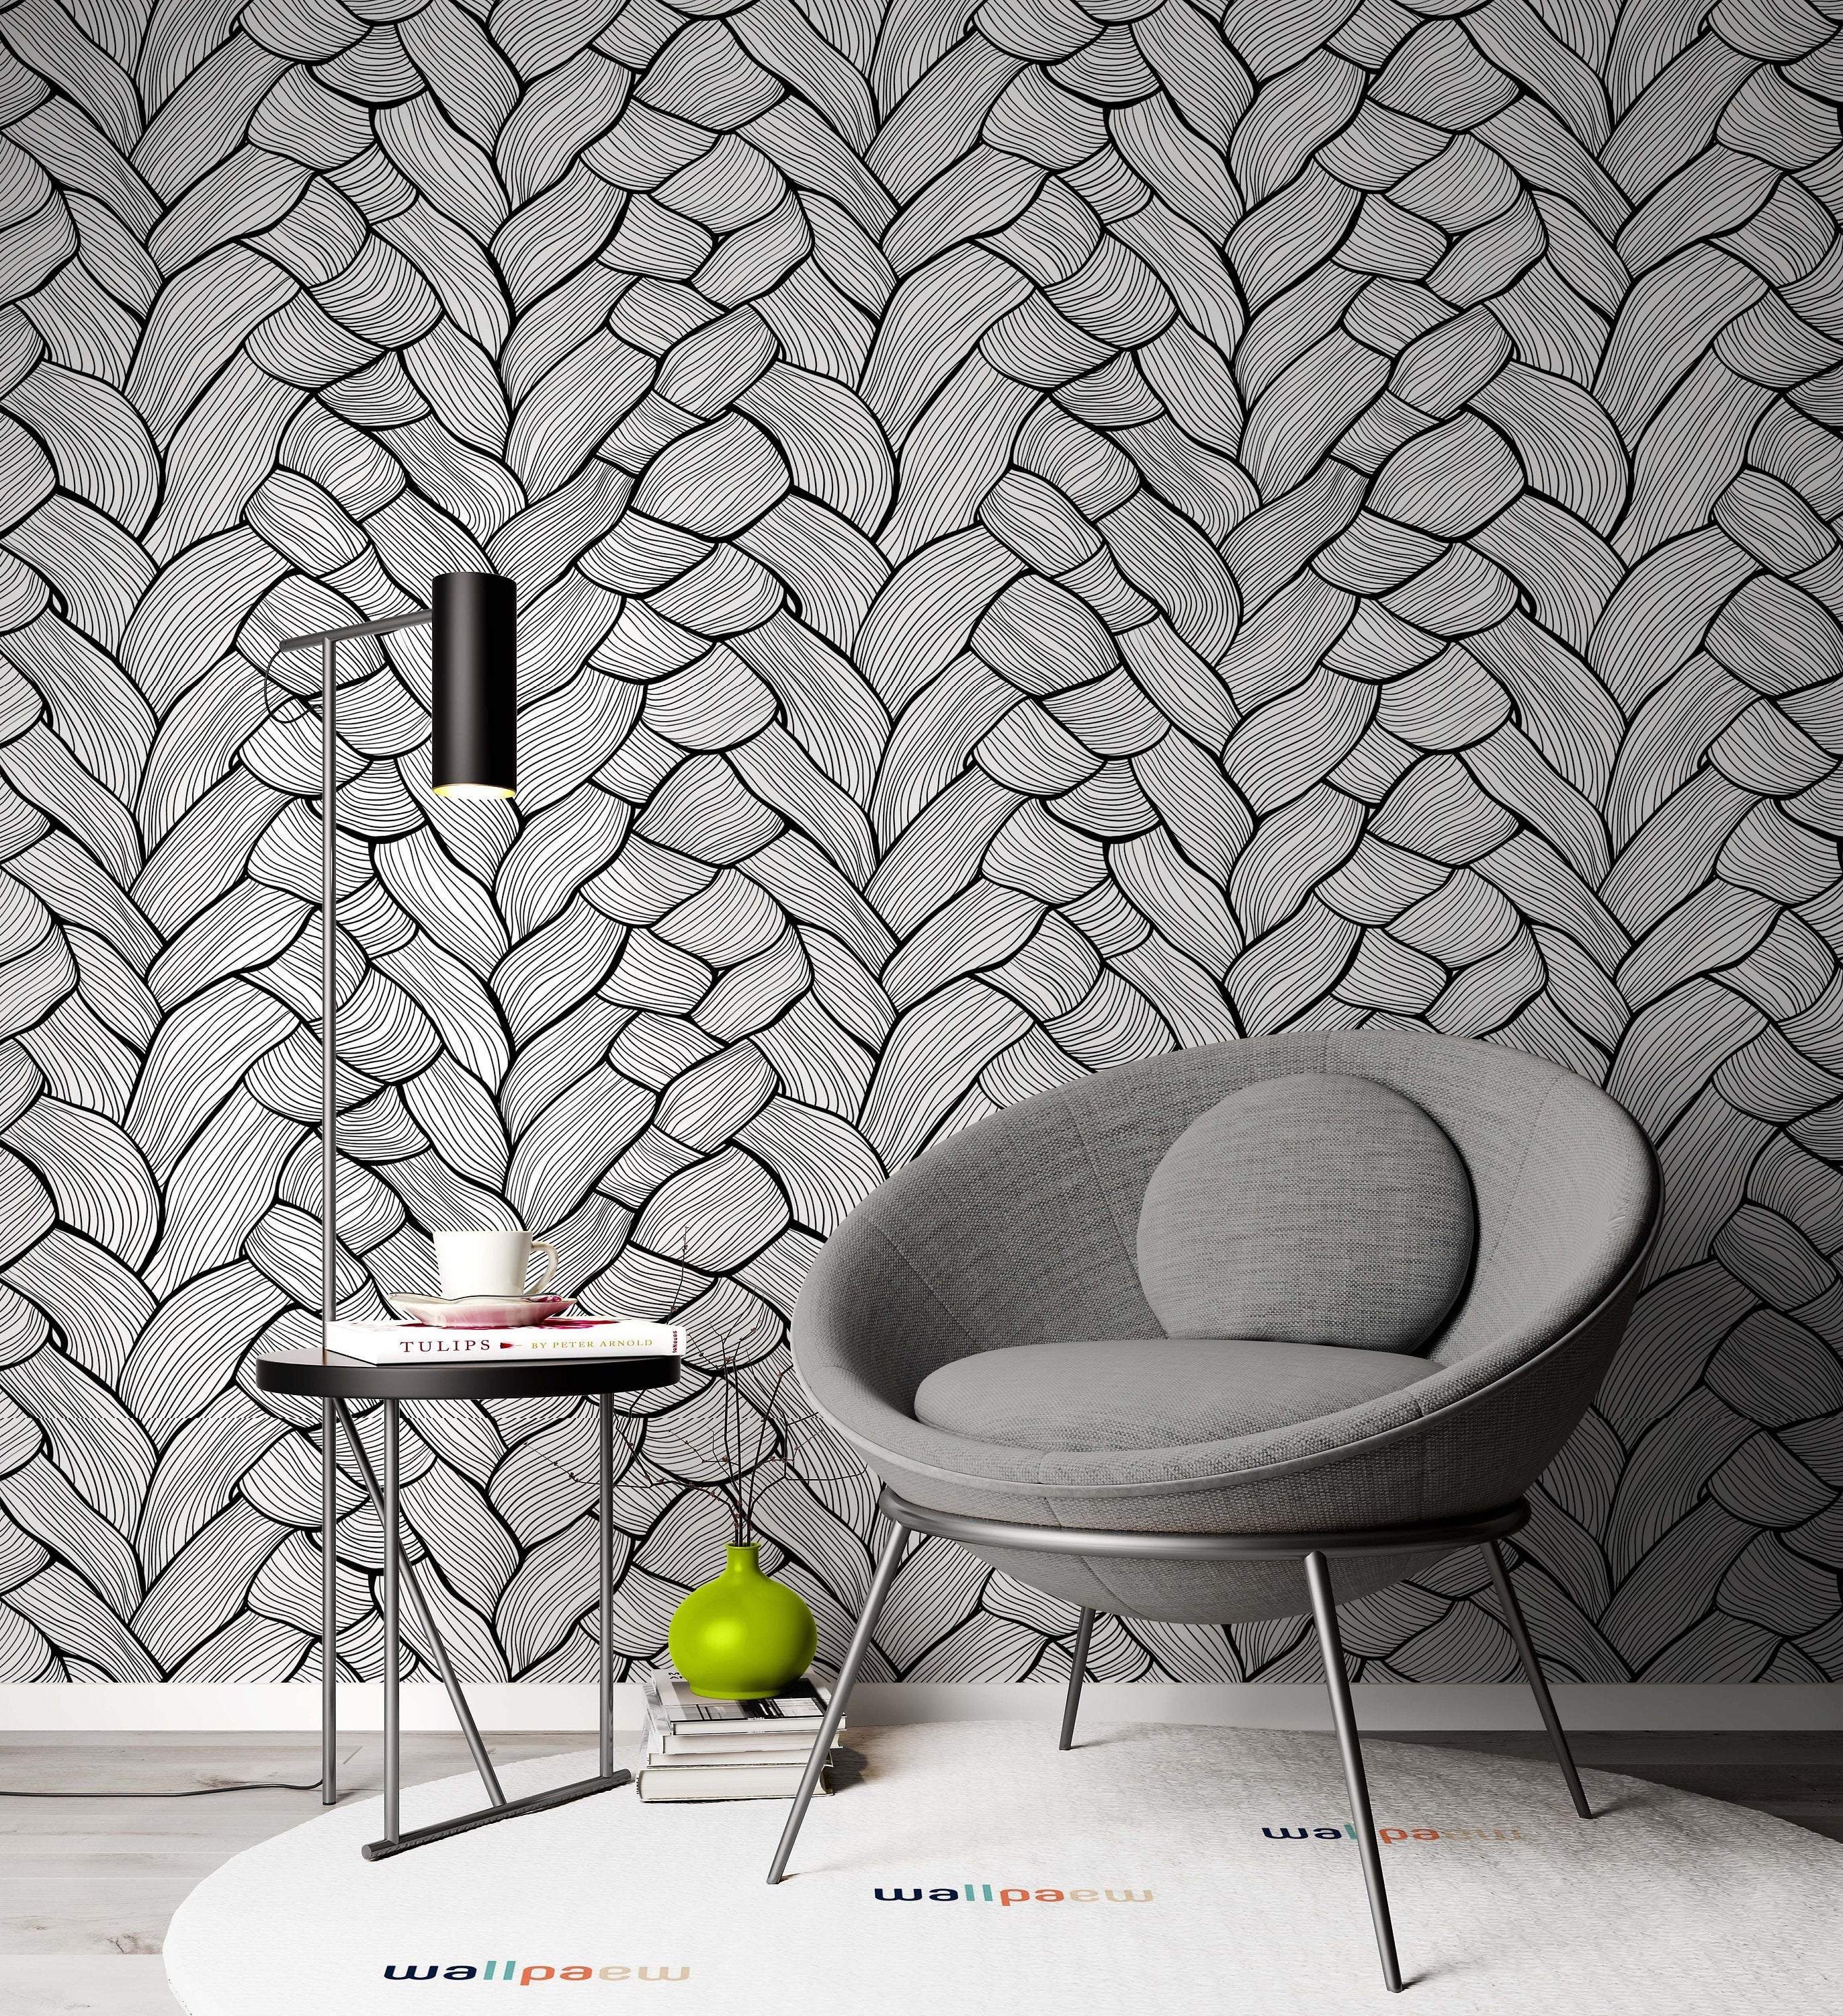 Abstract Hand Drawn Structural Motif Wallpaper Cafe Restaurant Decoration Living Room Bedroom Mural Home Decor Wall Art